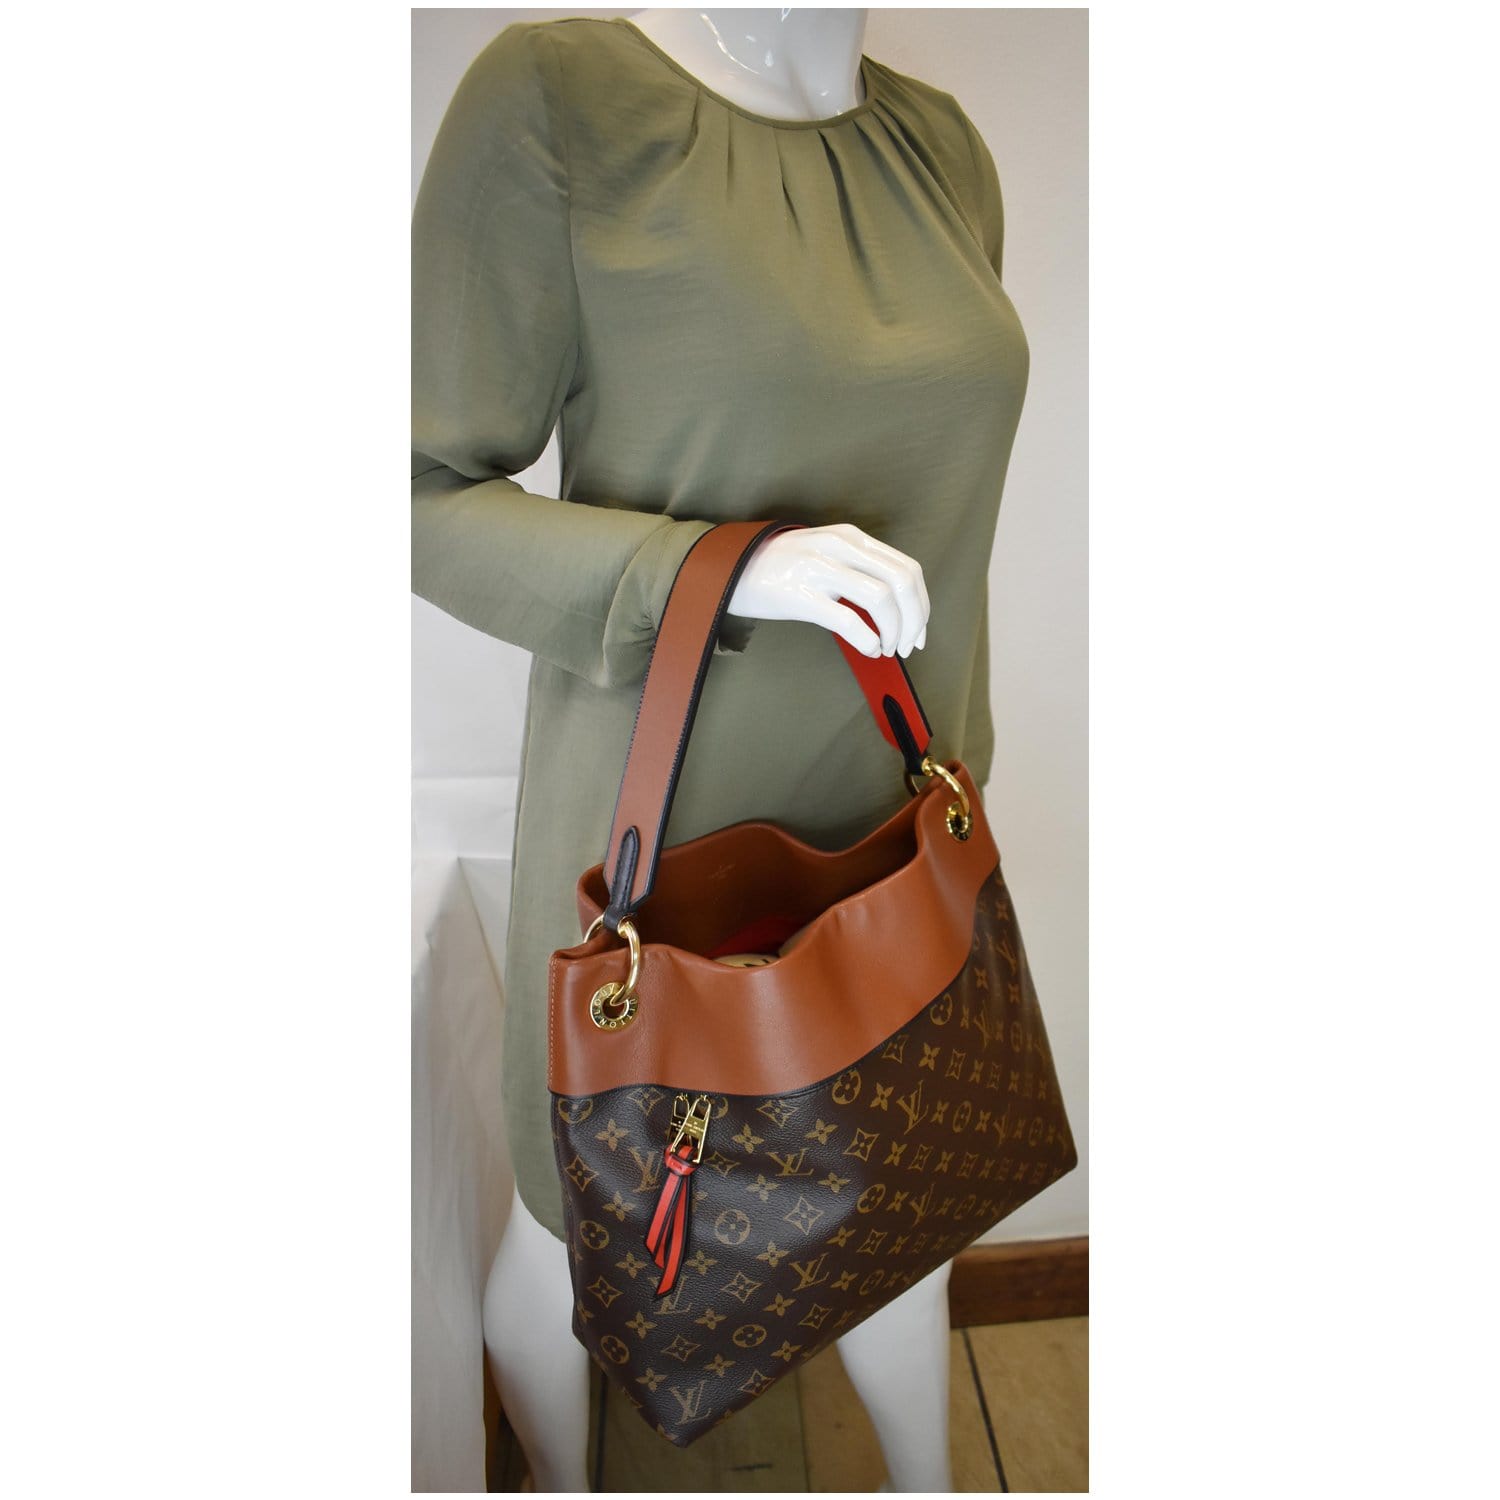 Gorgeous Authentic Louis Vuitton Tuileries Besace Carmel Red Hobo